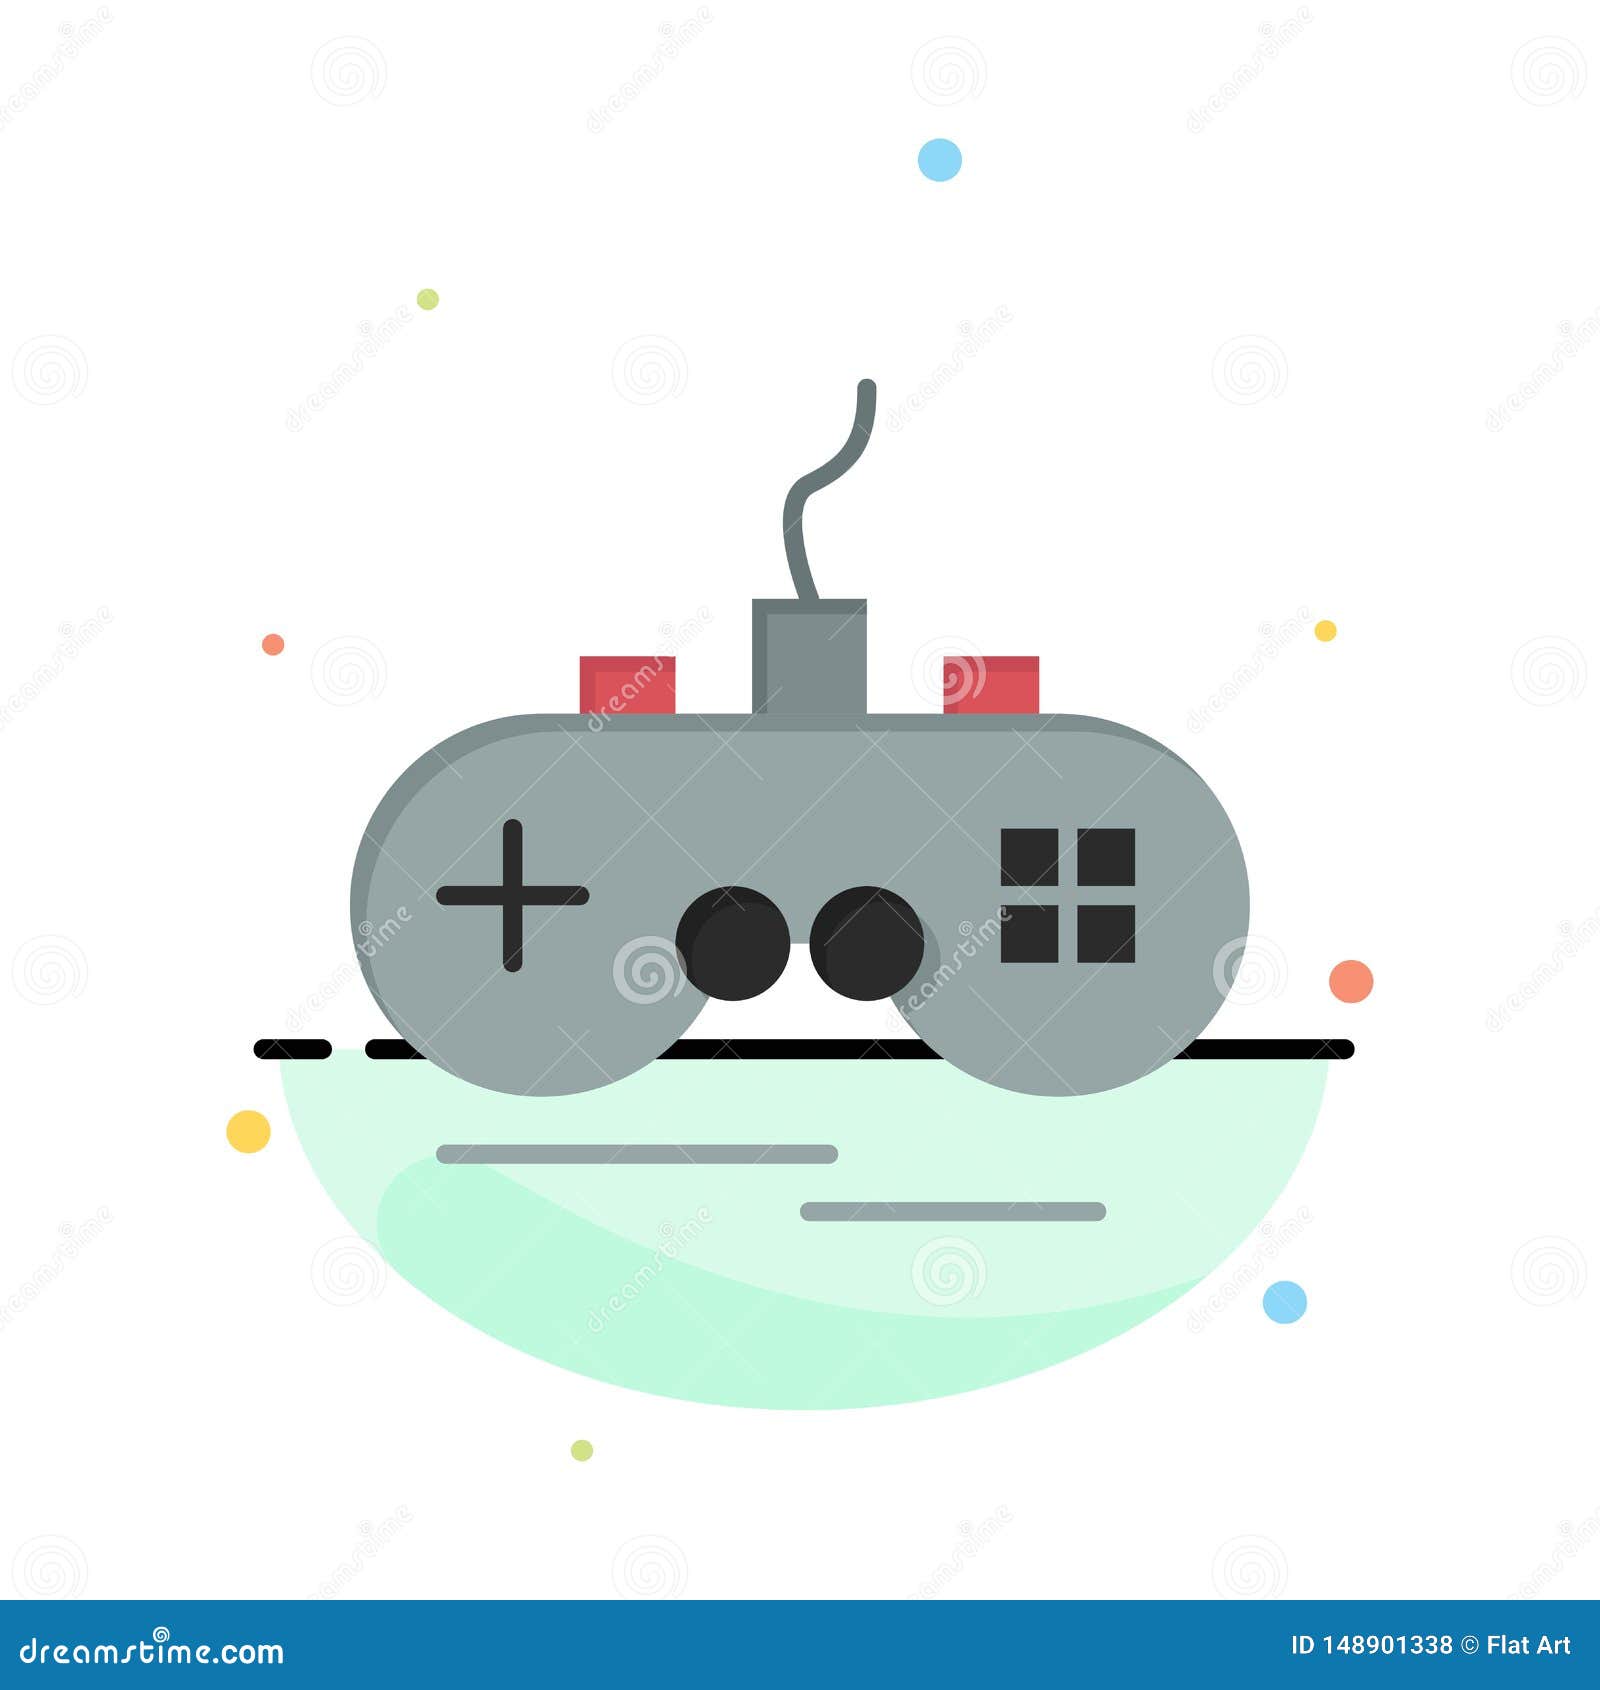 joystick, wireless, xbox, gamepad abstract flat color icon template